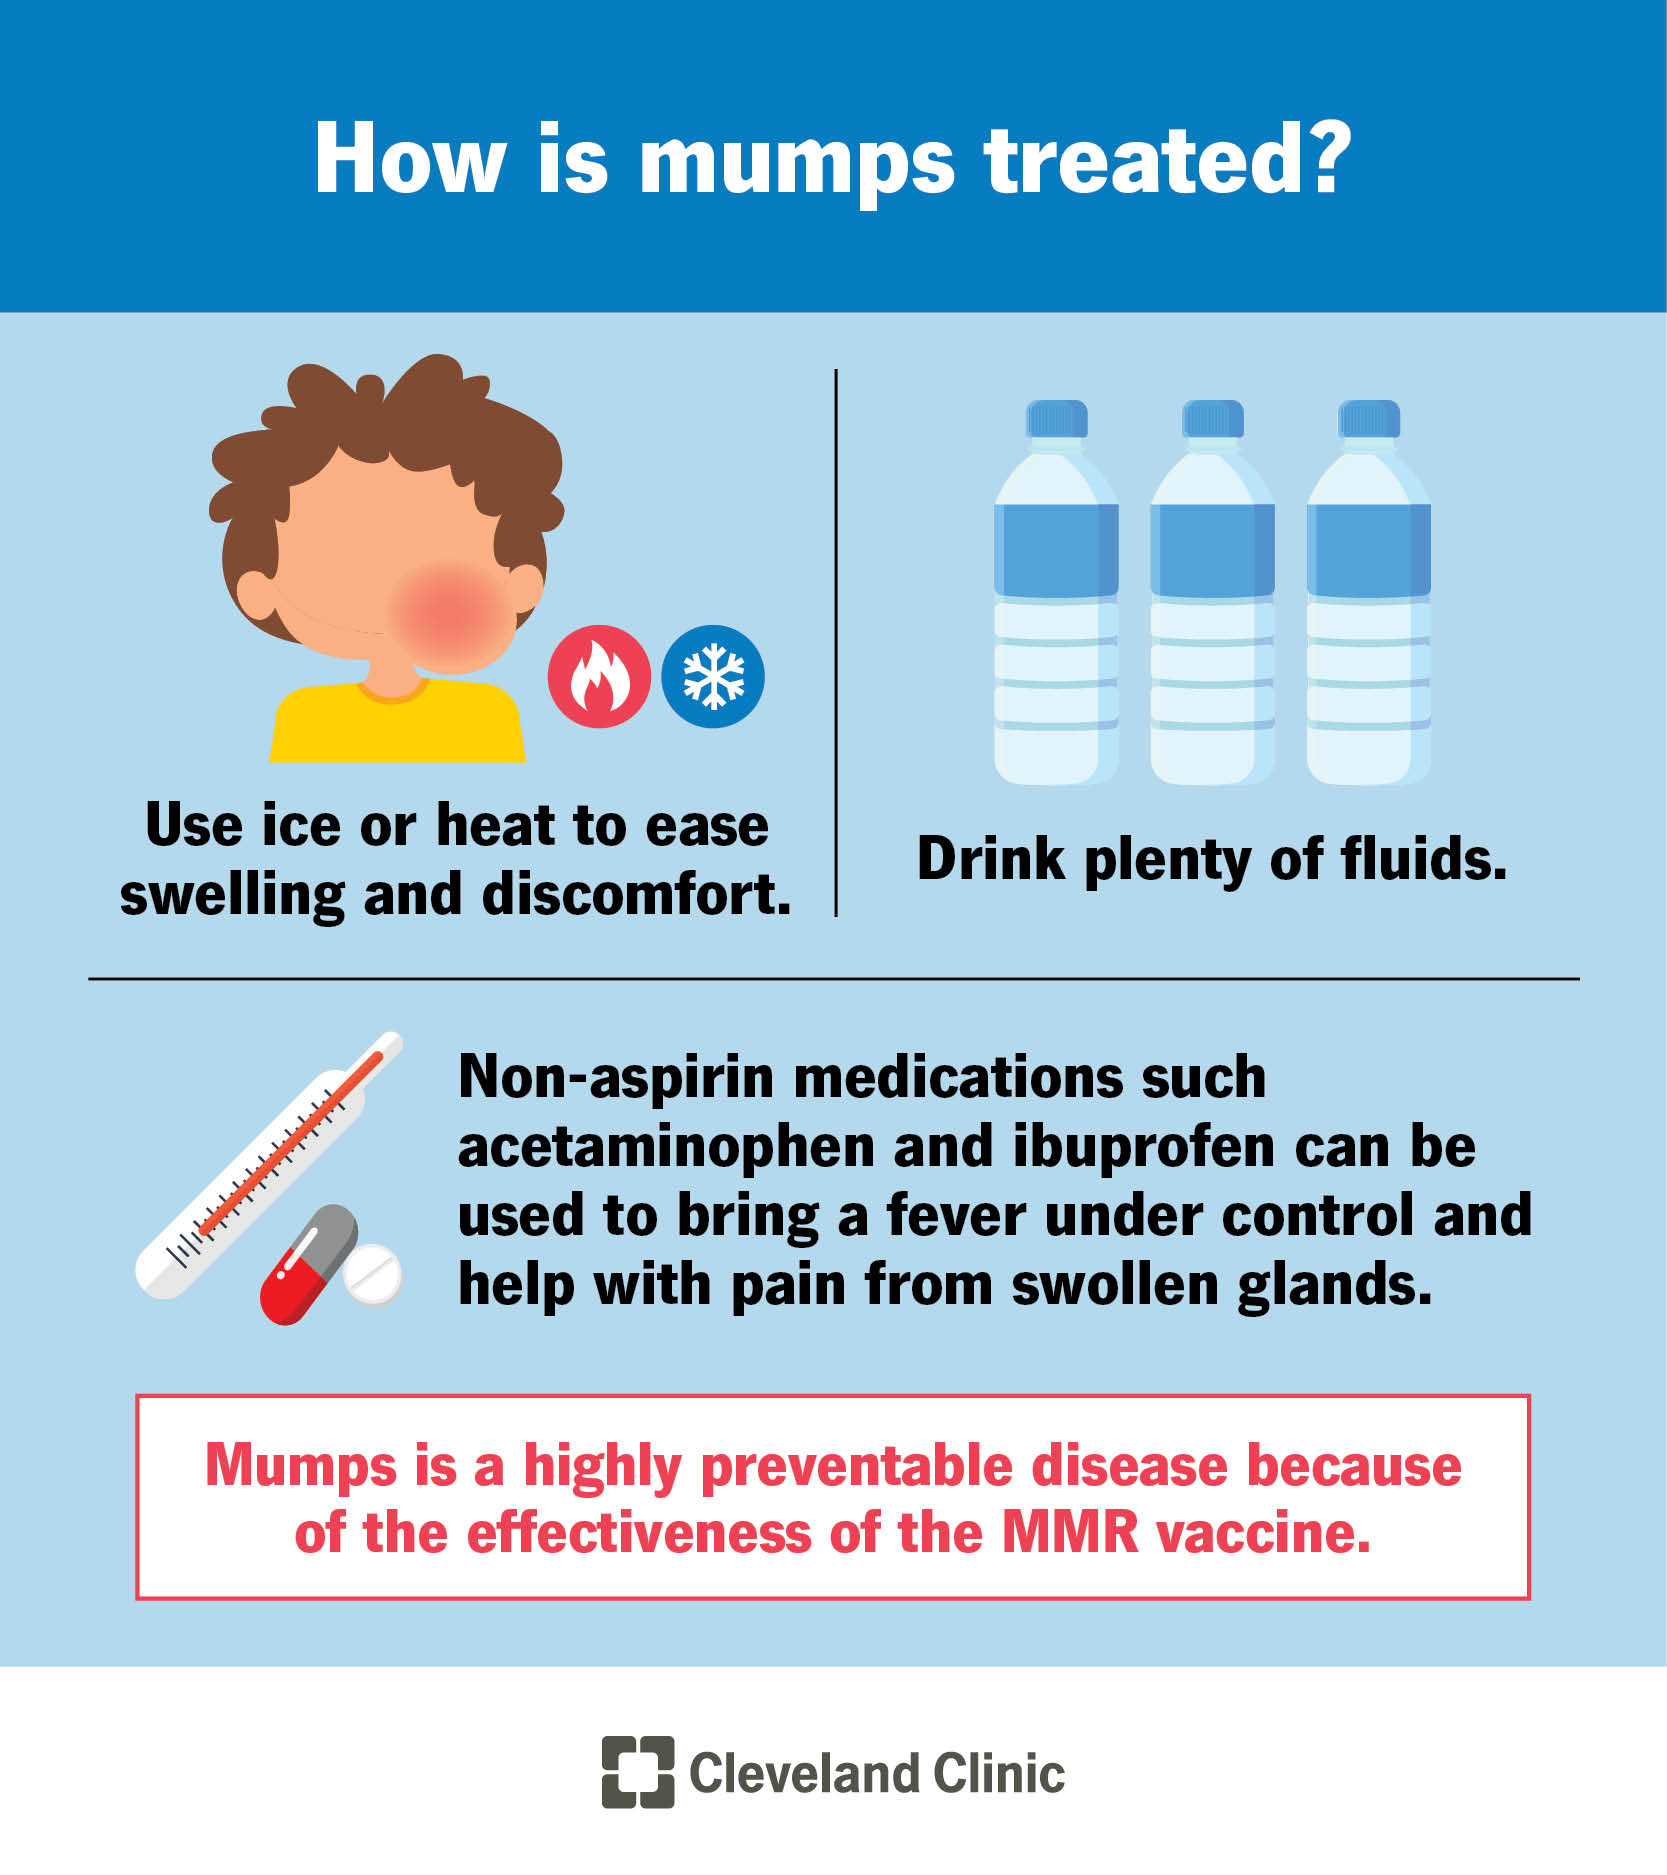 The treatment for mumps focuses on relieving your child’s symptoms to make them as comfortable as possible.